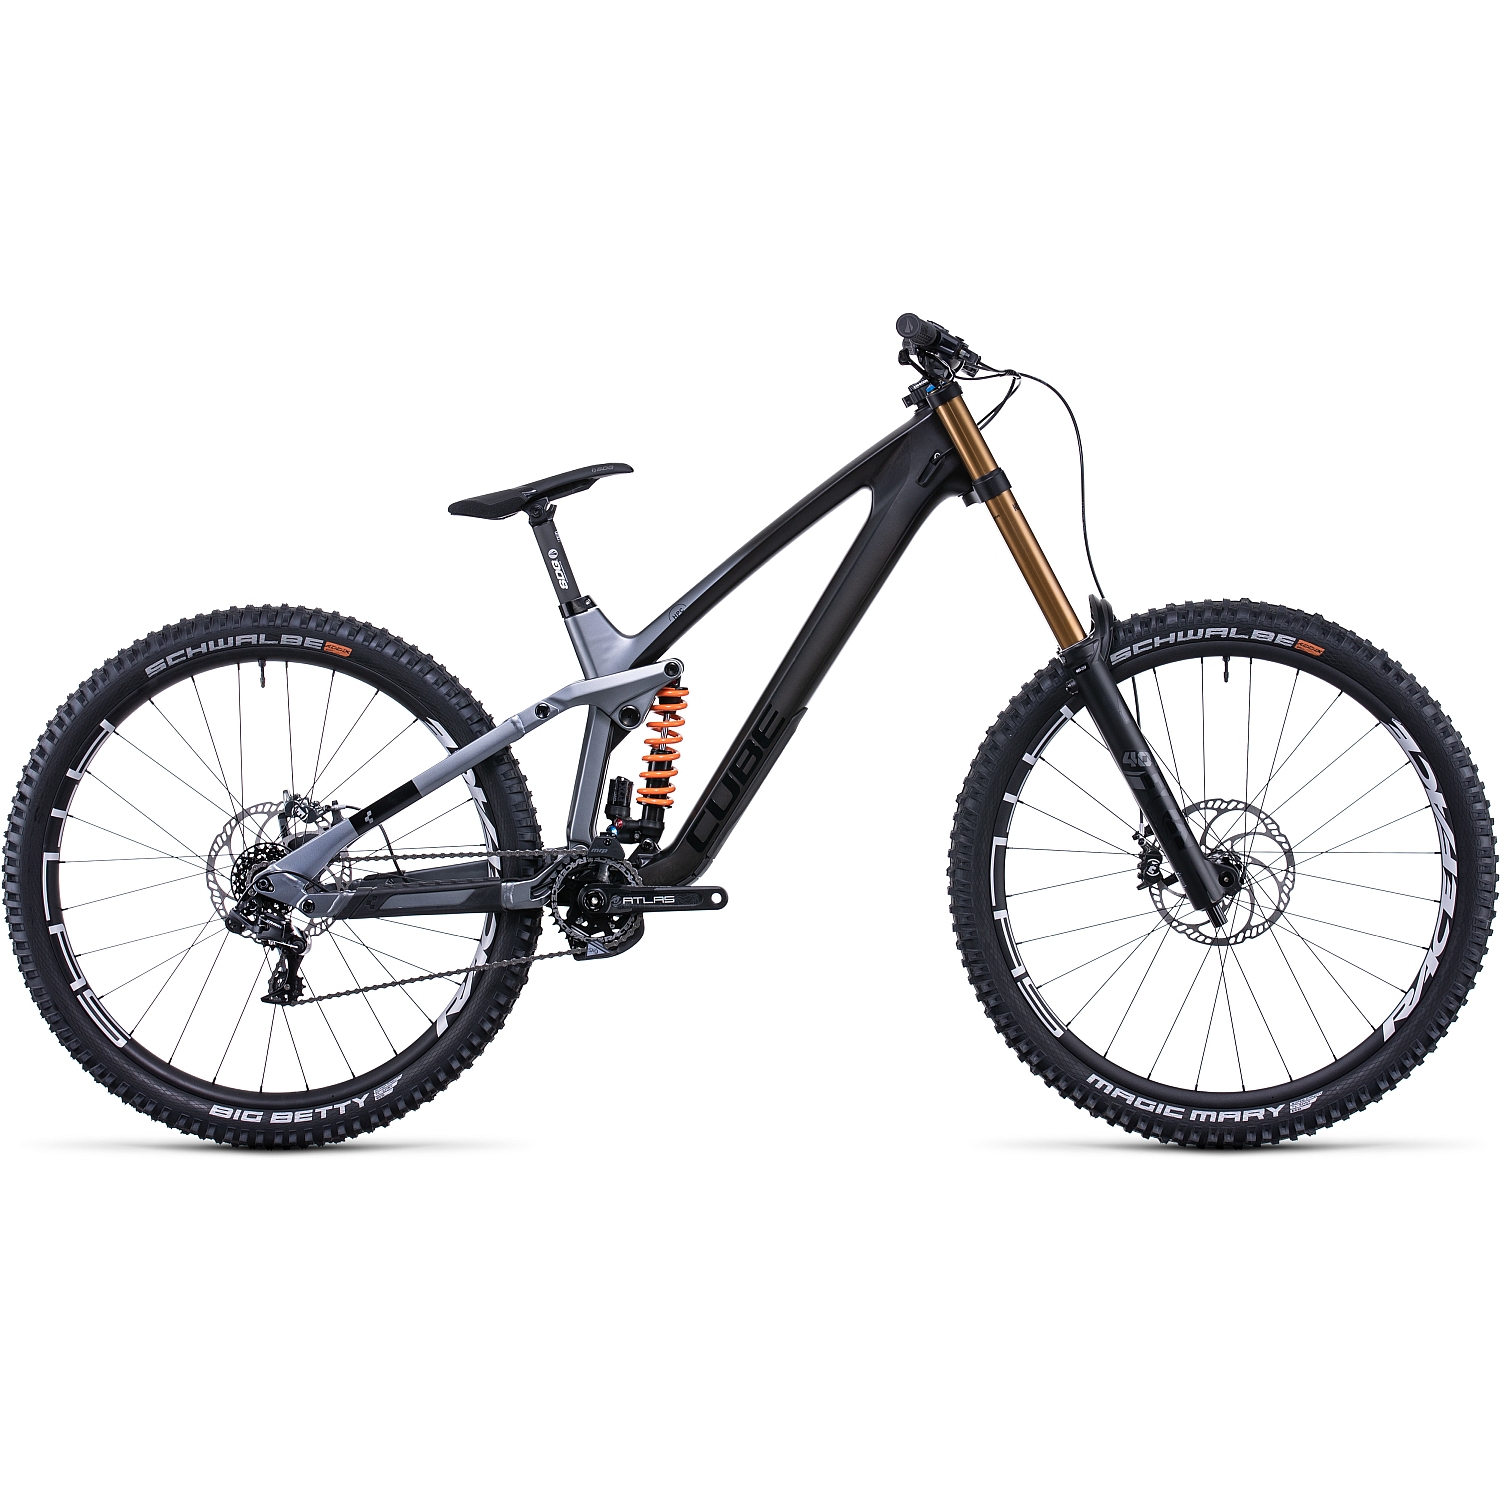 Picture of CUBE TWO15 HPC SLT - 29 Inches DH Carbon Mountainbike - 2022 - carbon/flashgrey A00